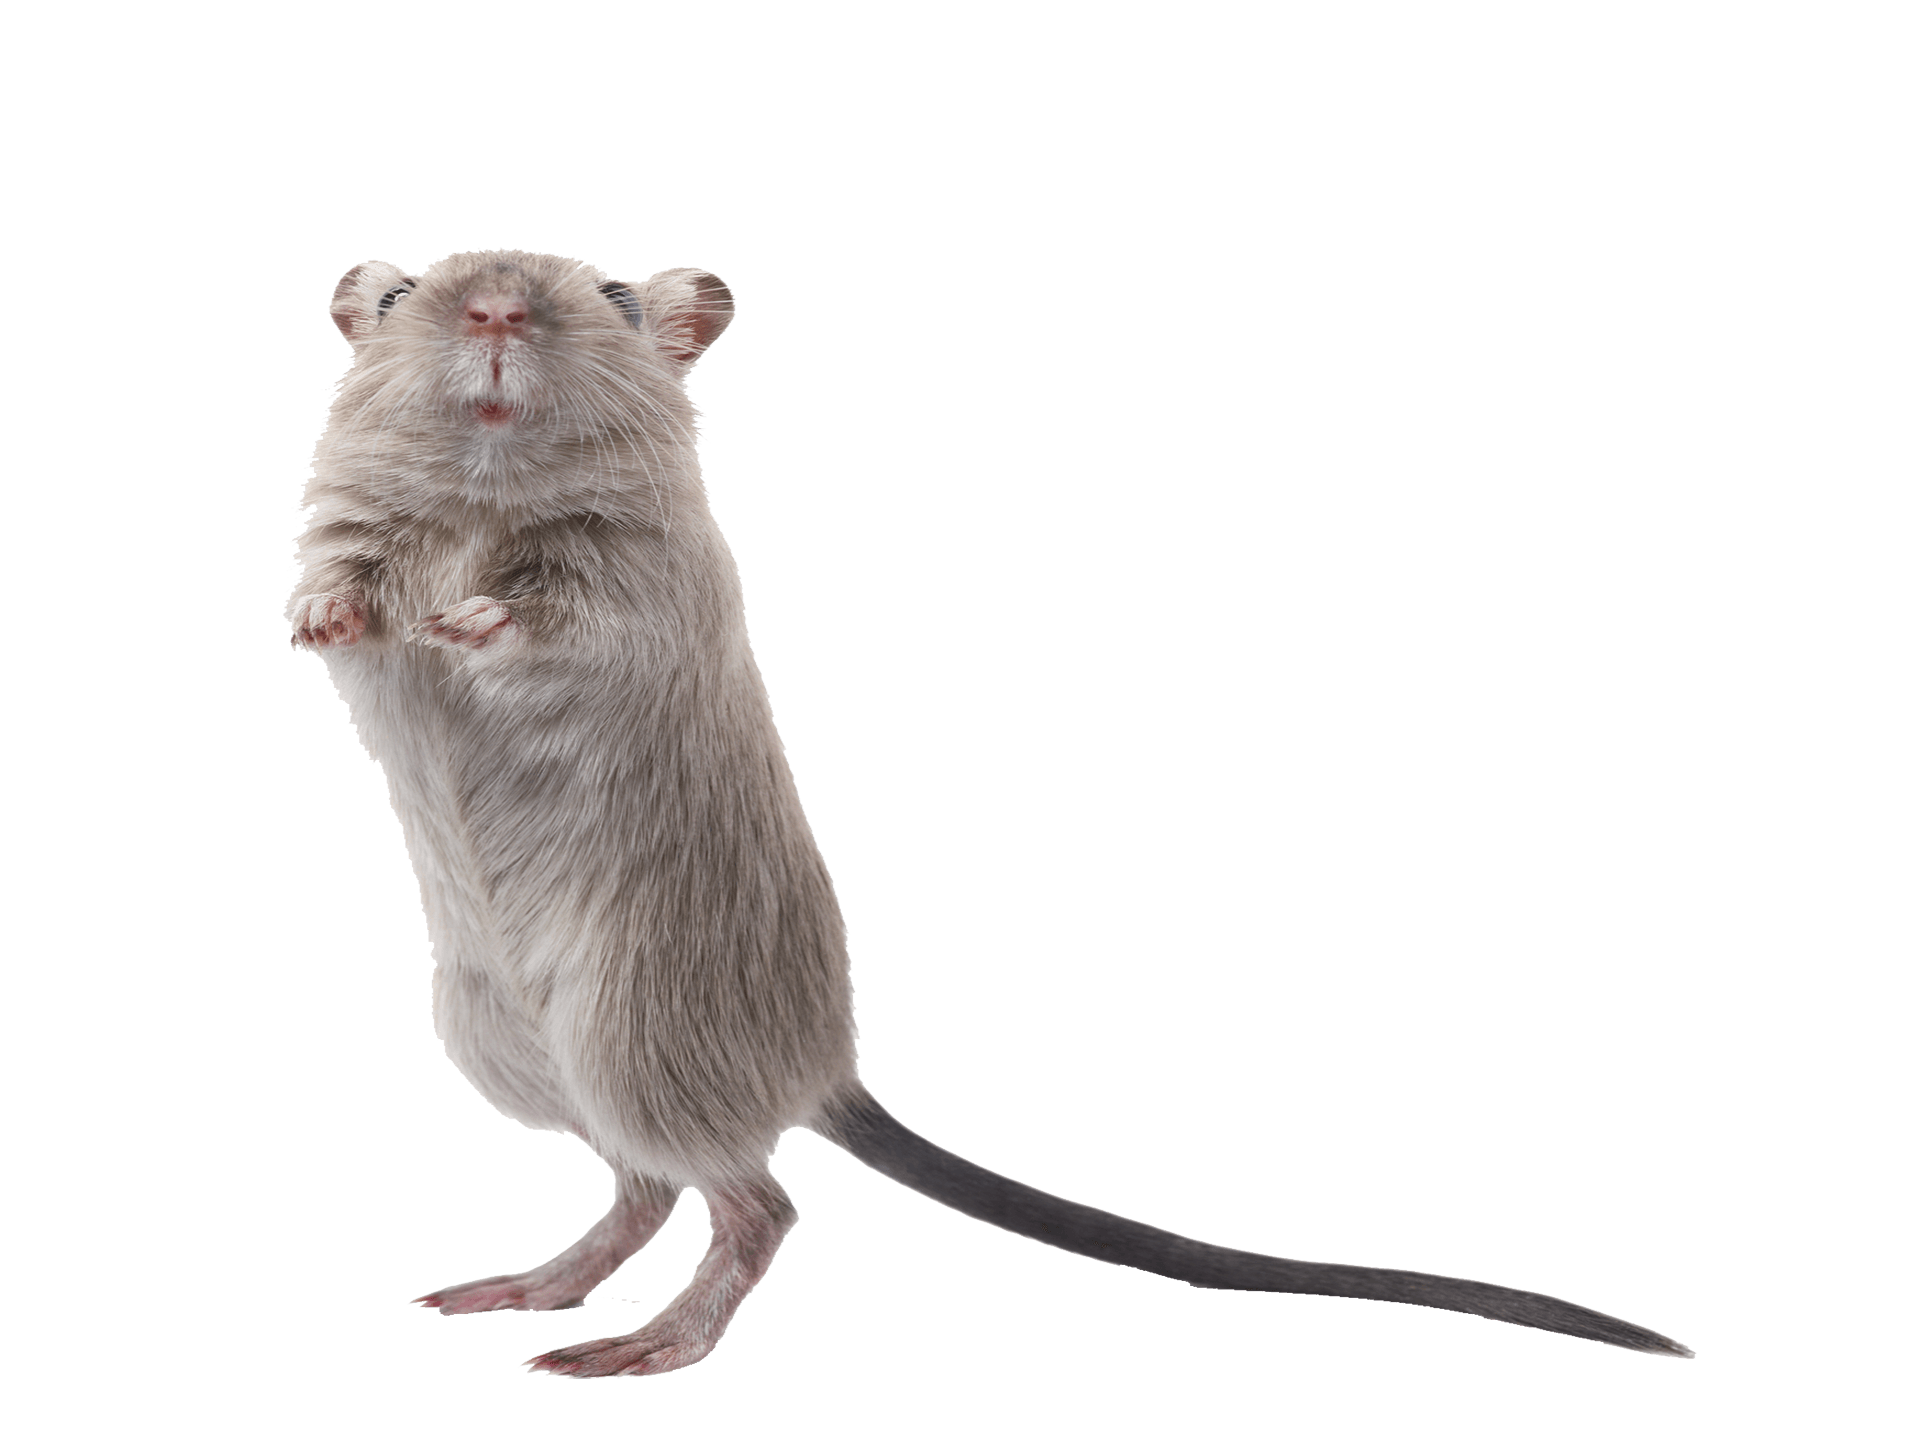 Curious Rodent - Jacksonville, IL - Rid -All Pest Control Co Inc